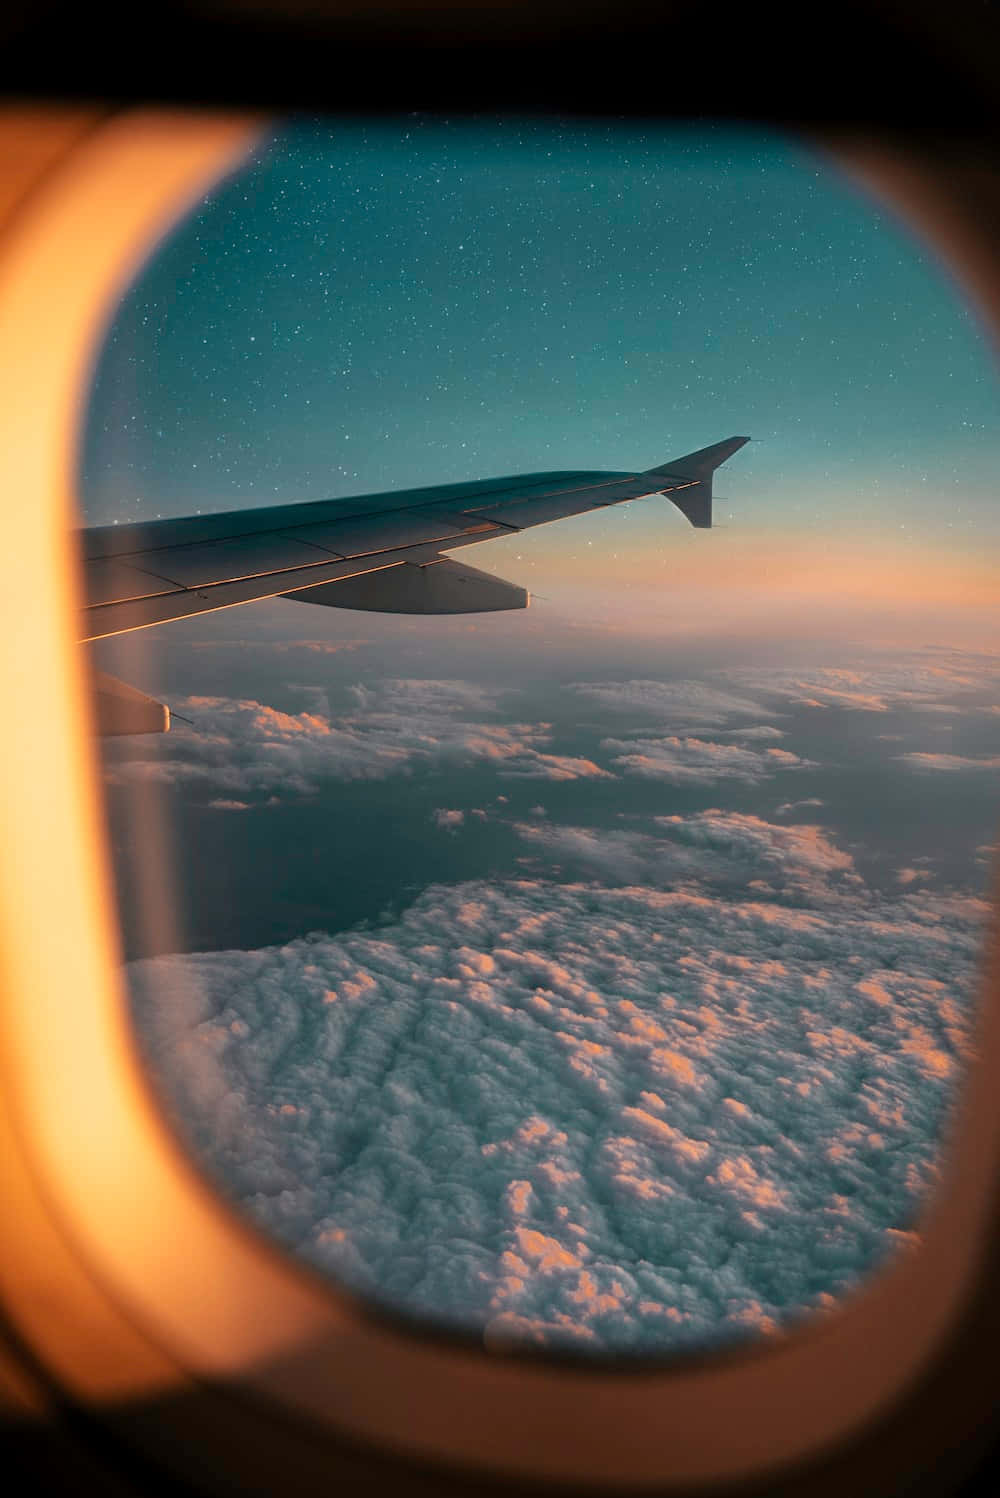 "The beauty of Earthly wonders seen from an airplane window"